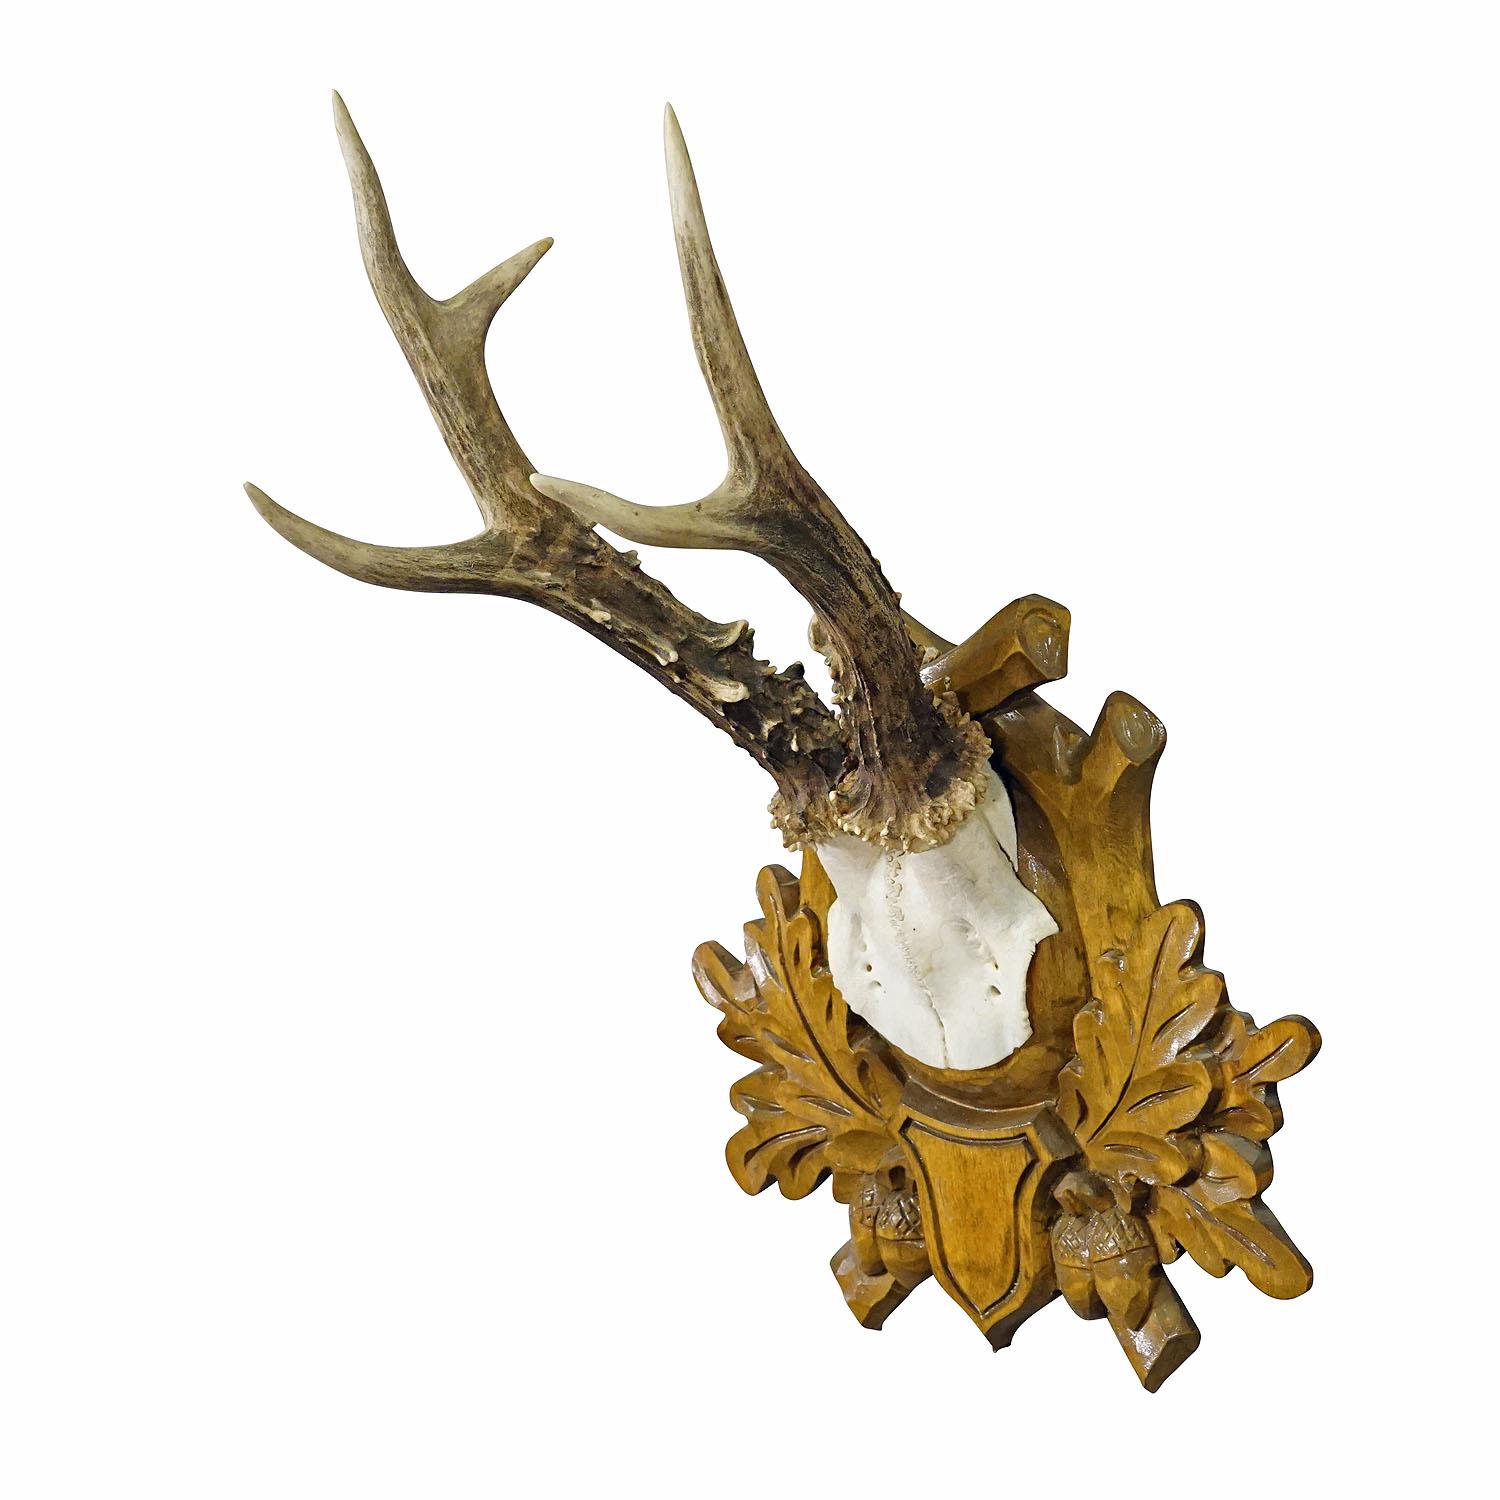 Black Forest Vintage Deer Trophy on Carved Plaque

A large vintage deer (Capreolus capreolus) trophy on a wooden carved plaque. The trophy was shot in Germany ca. 1960s. Good condition.

Trophies are mementos from the hunted game, which are kept by